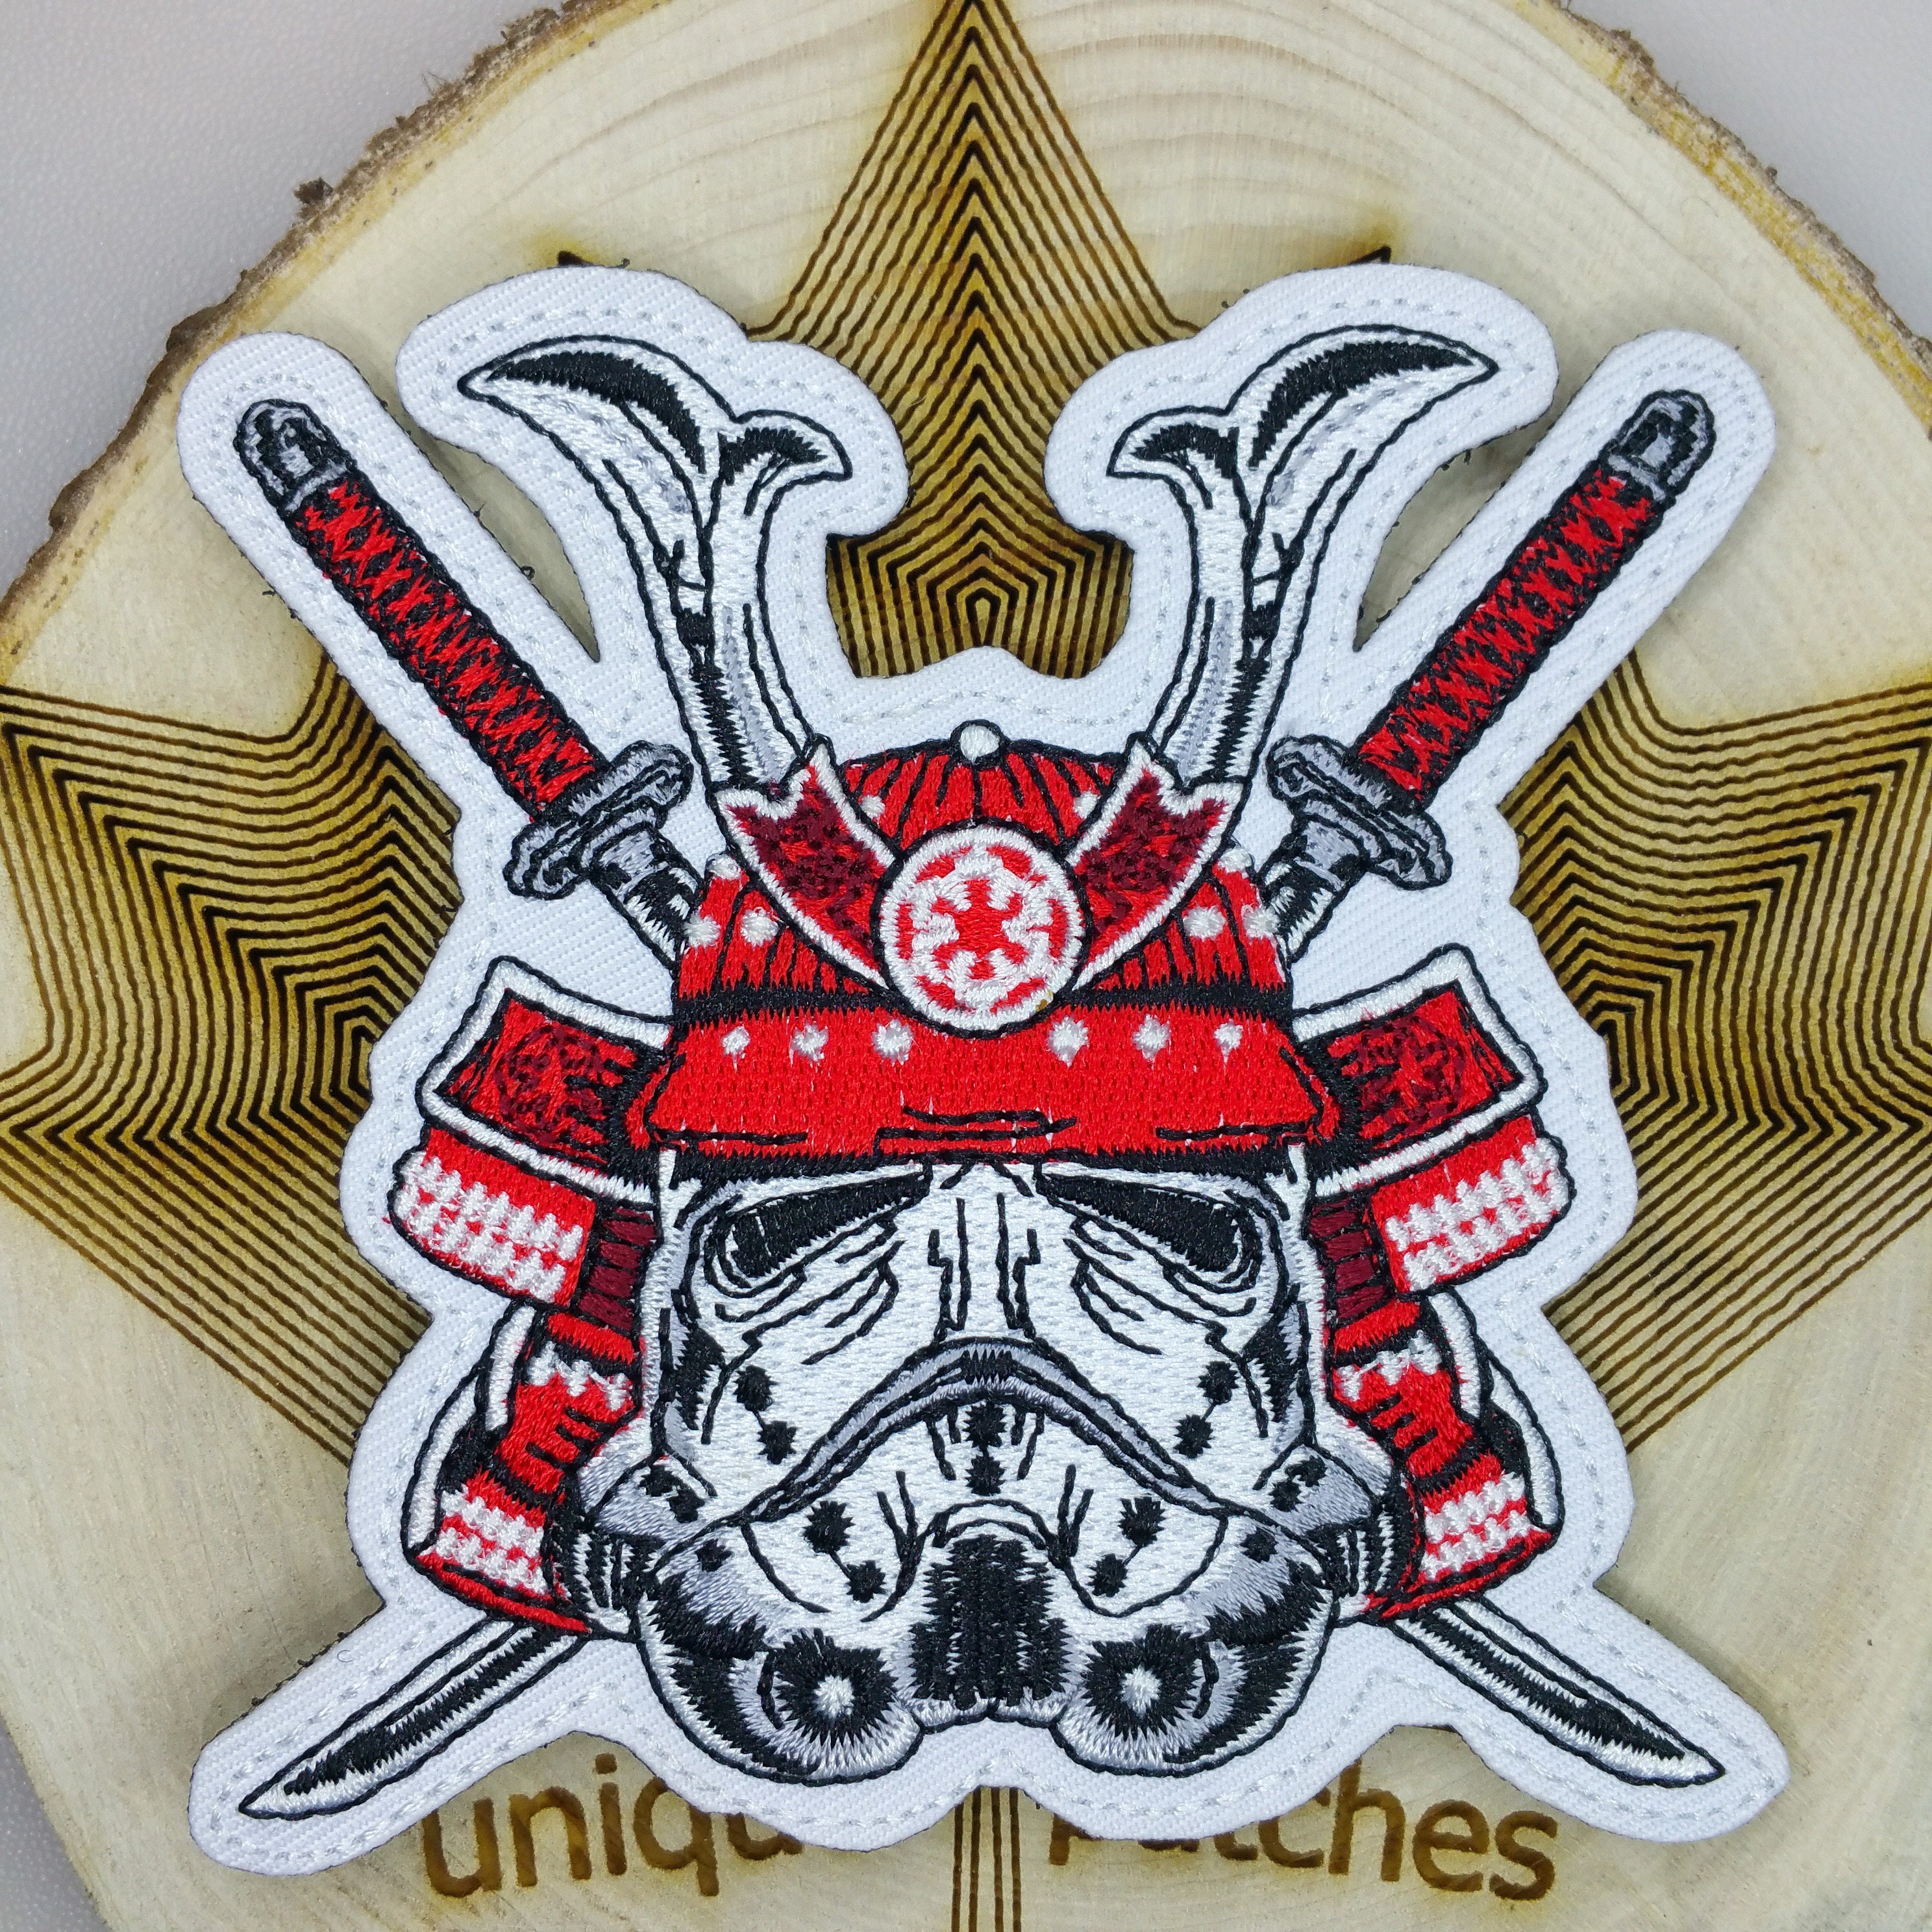 Buy Star Wars Patch Hook Loop Embroidered Patches For Clothing Sew/Iron on  Patches On Clothes Stripe Embroidery Military Patch Online - 360 Digitizing  - Embroidery Designs